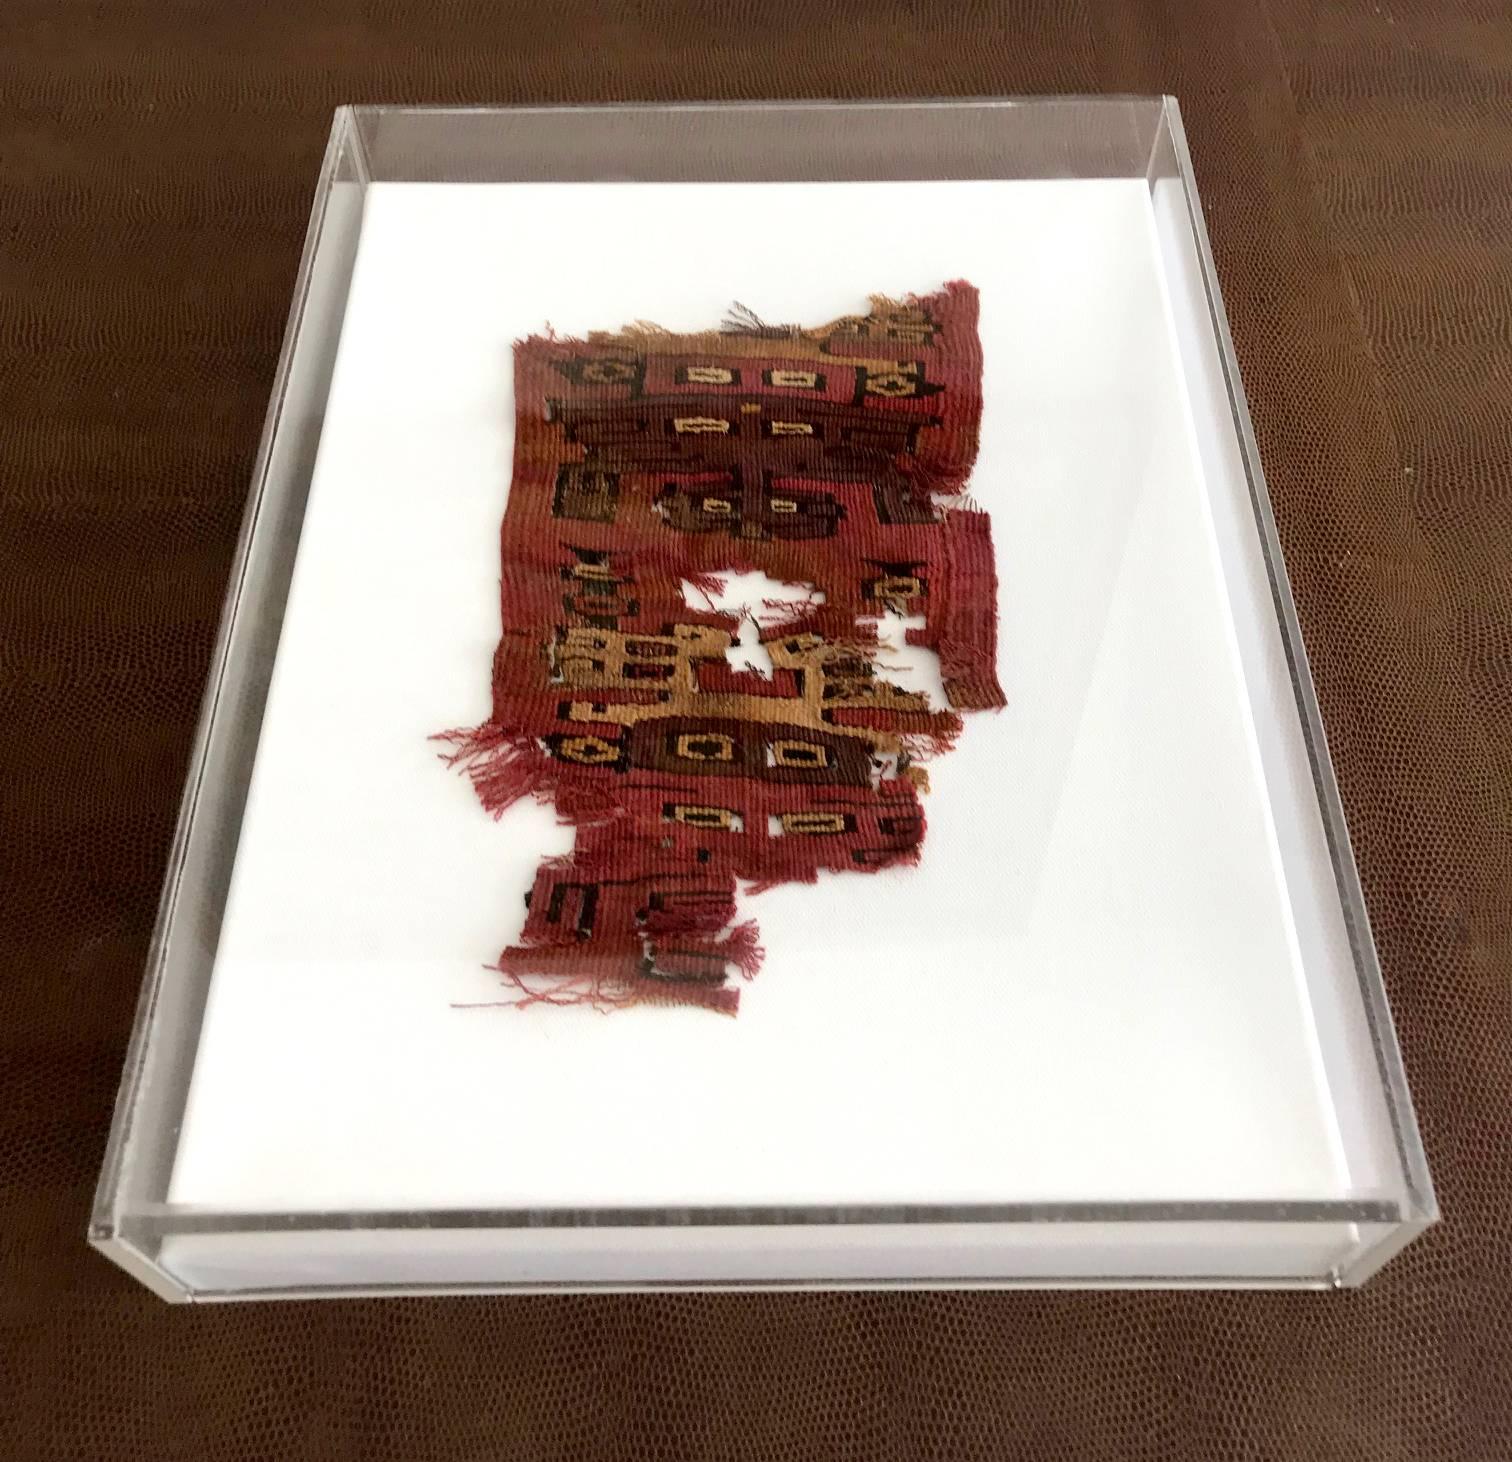 A piece of antique textile fragment from Pre-Columbian Peru, attributed to the Paracas culture, which flourished on the southern coast of the central Andes, Peru in around 600-150 B.C.E. and is one of the earliest known complex societies in South